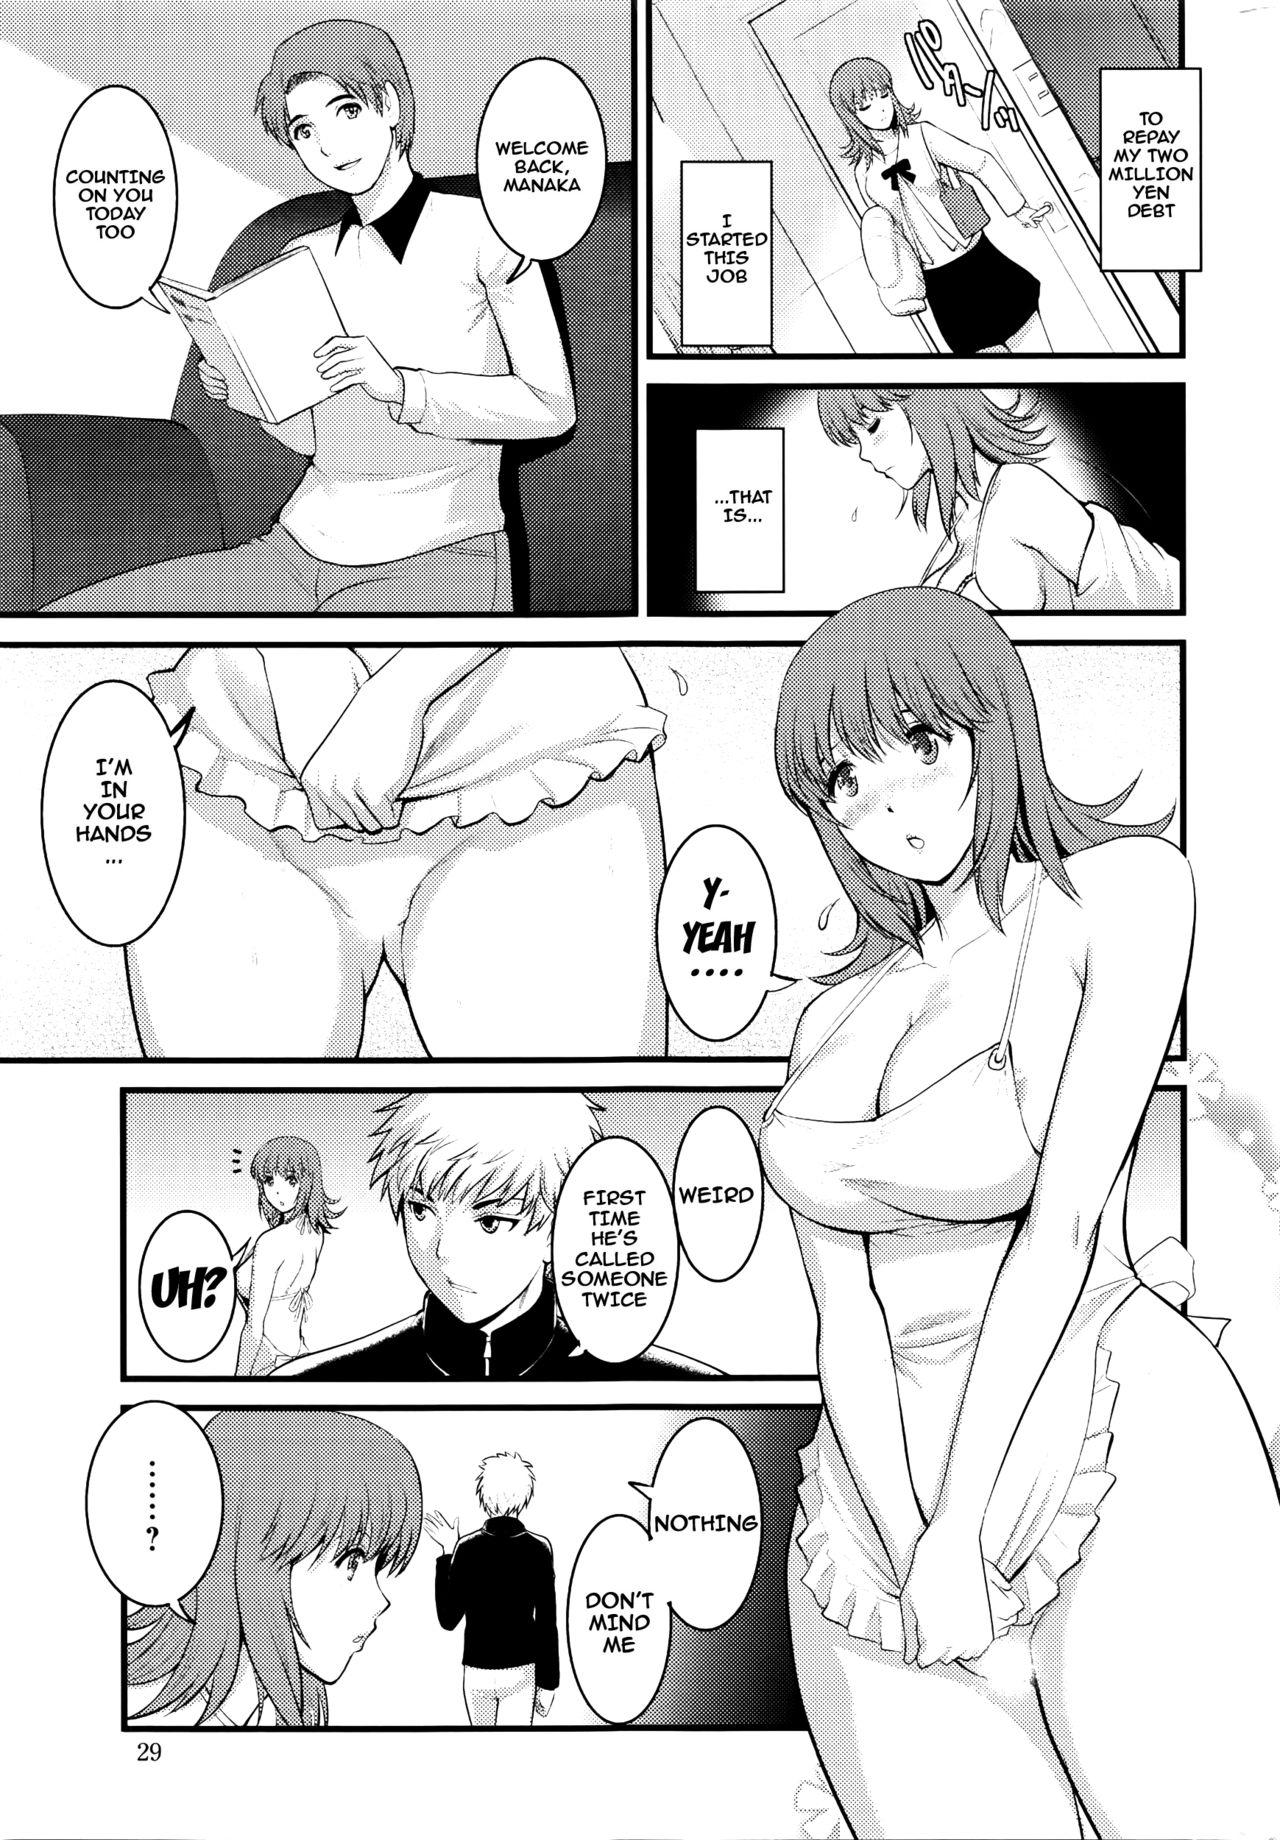 Girlongirl [Saigado] Part Time Manaka-san 2nd Ch. 1-2 [English] {doujins.com} [Incomplete] Perfect Butt - Page 11